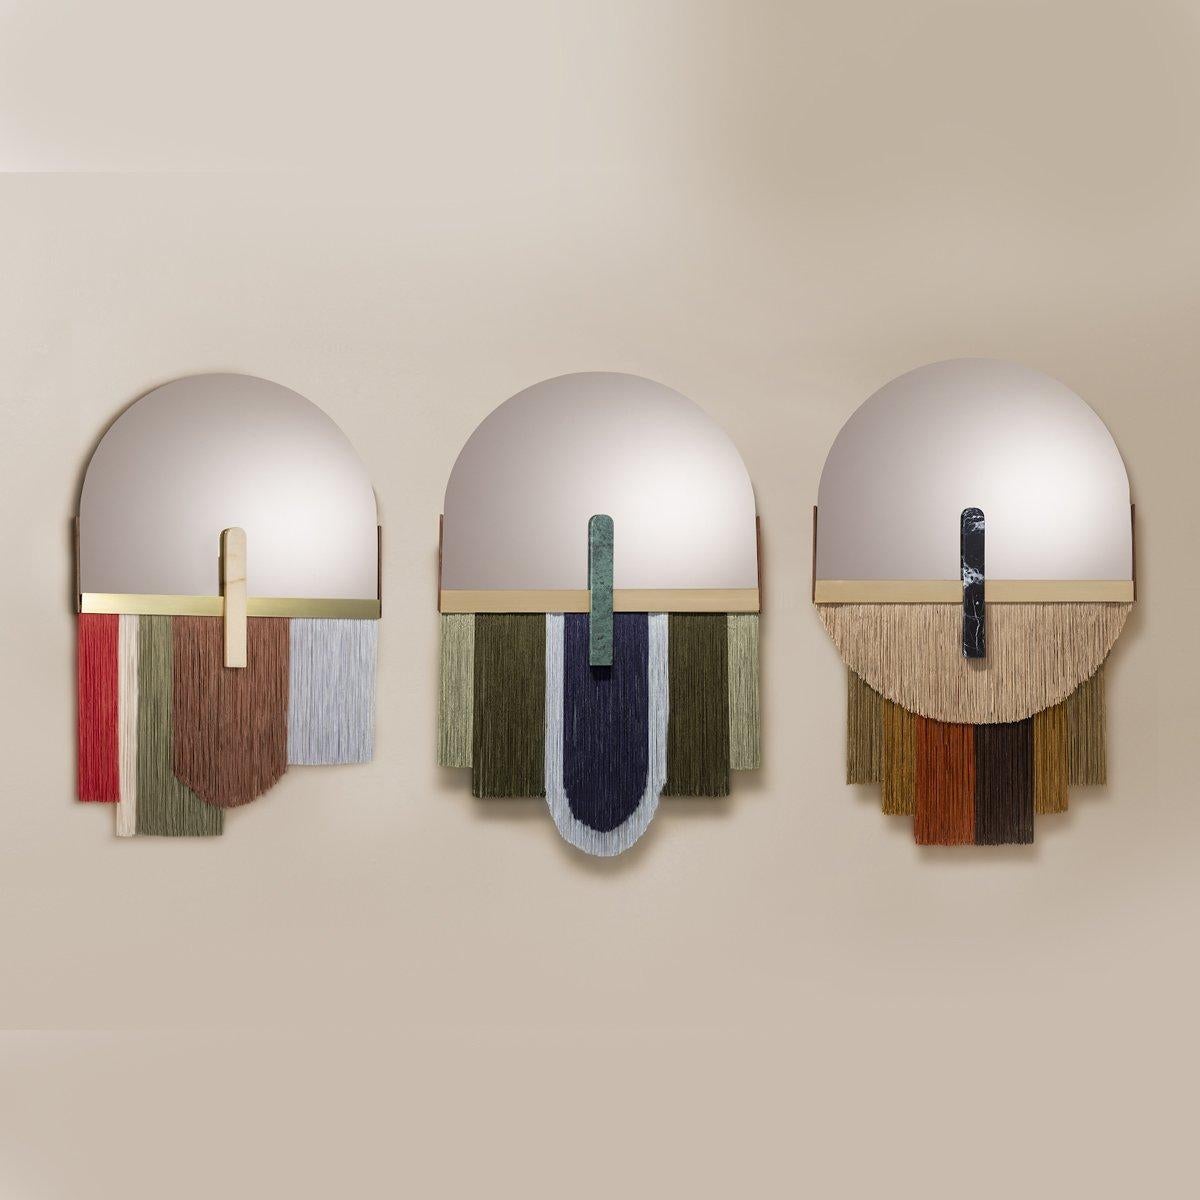 Souk papaya  Colorful Wall Mirror by Dooq
Dimensions
W 61 x H 97 cm

Materials and finishes
Mirror in colored glass, edge in brass, detail in marble, fringe in fabric, back of the mirror in wood.
Product
Souk papaya mirror is a flamboyant and